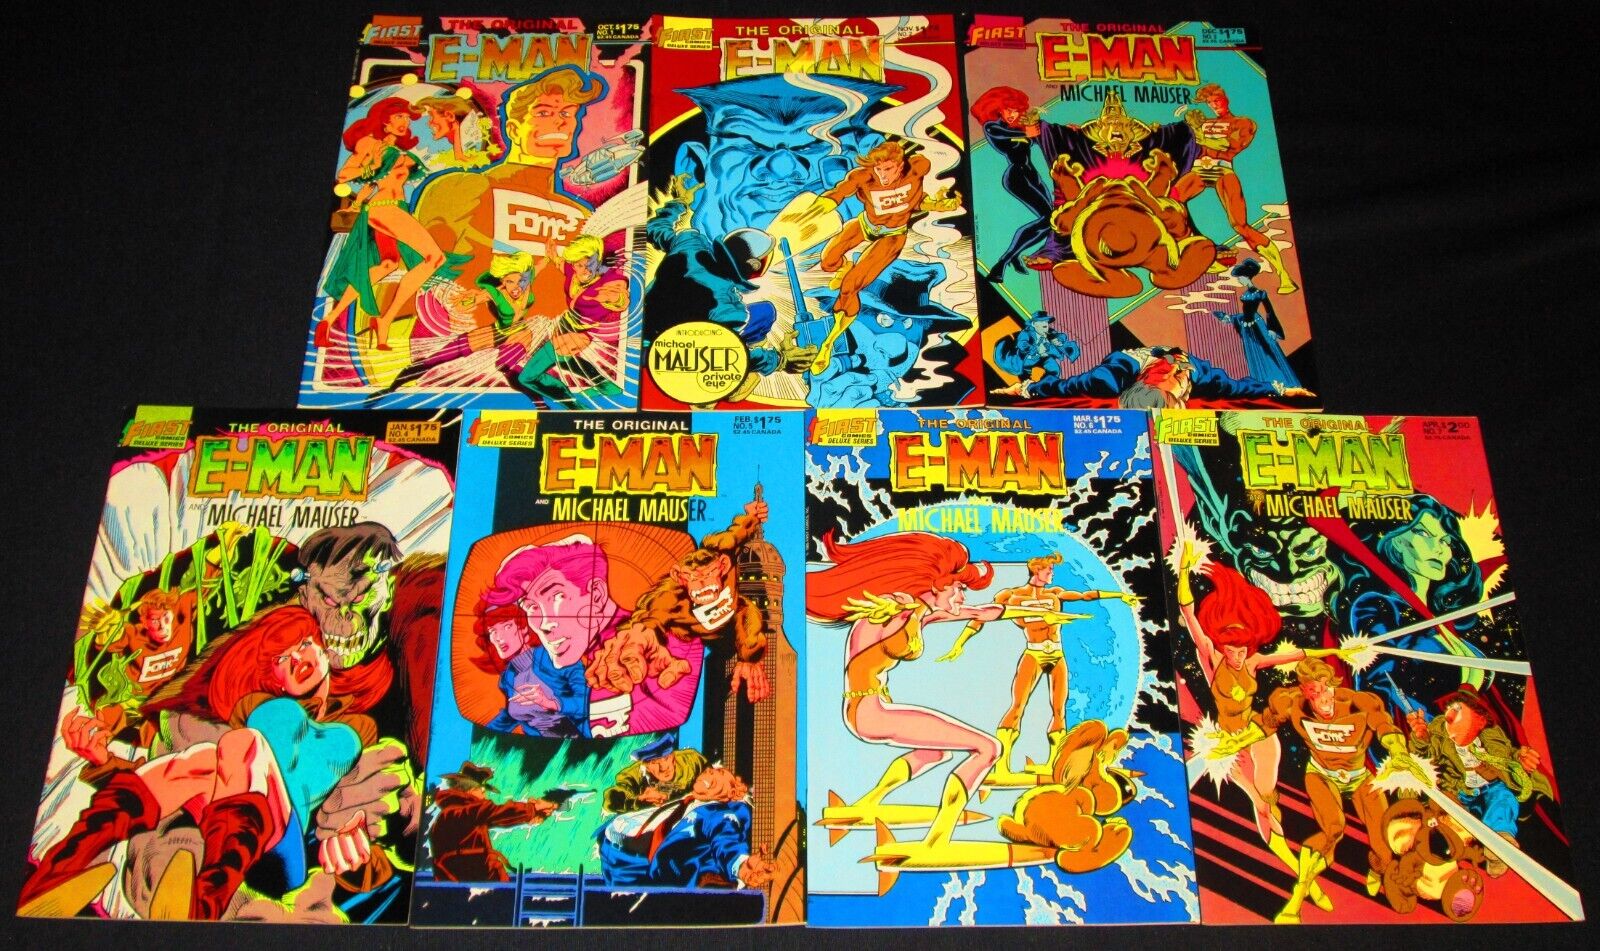 ORIGINAL E-MAN Issues 1-7 ~ COMPLETE SERIES [First Comics 1985] NM- or Better